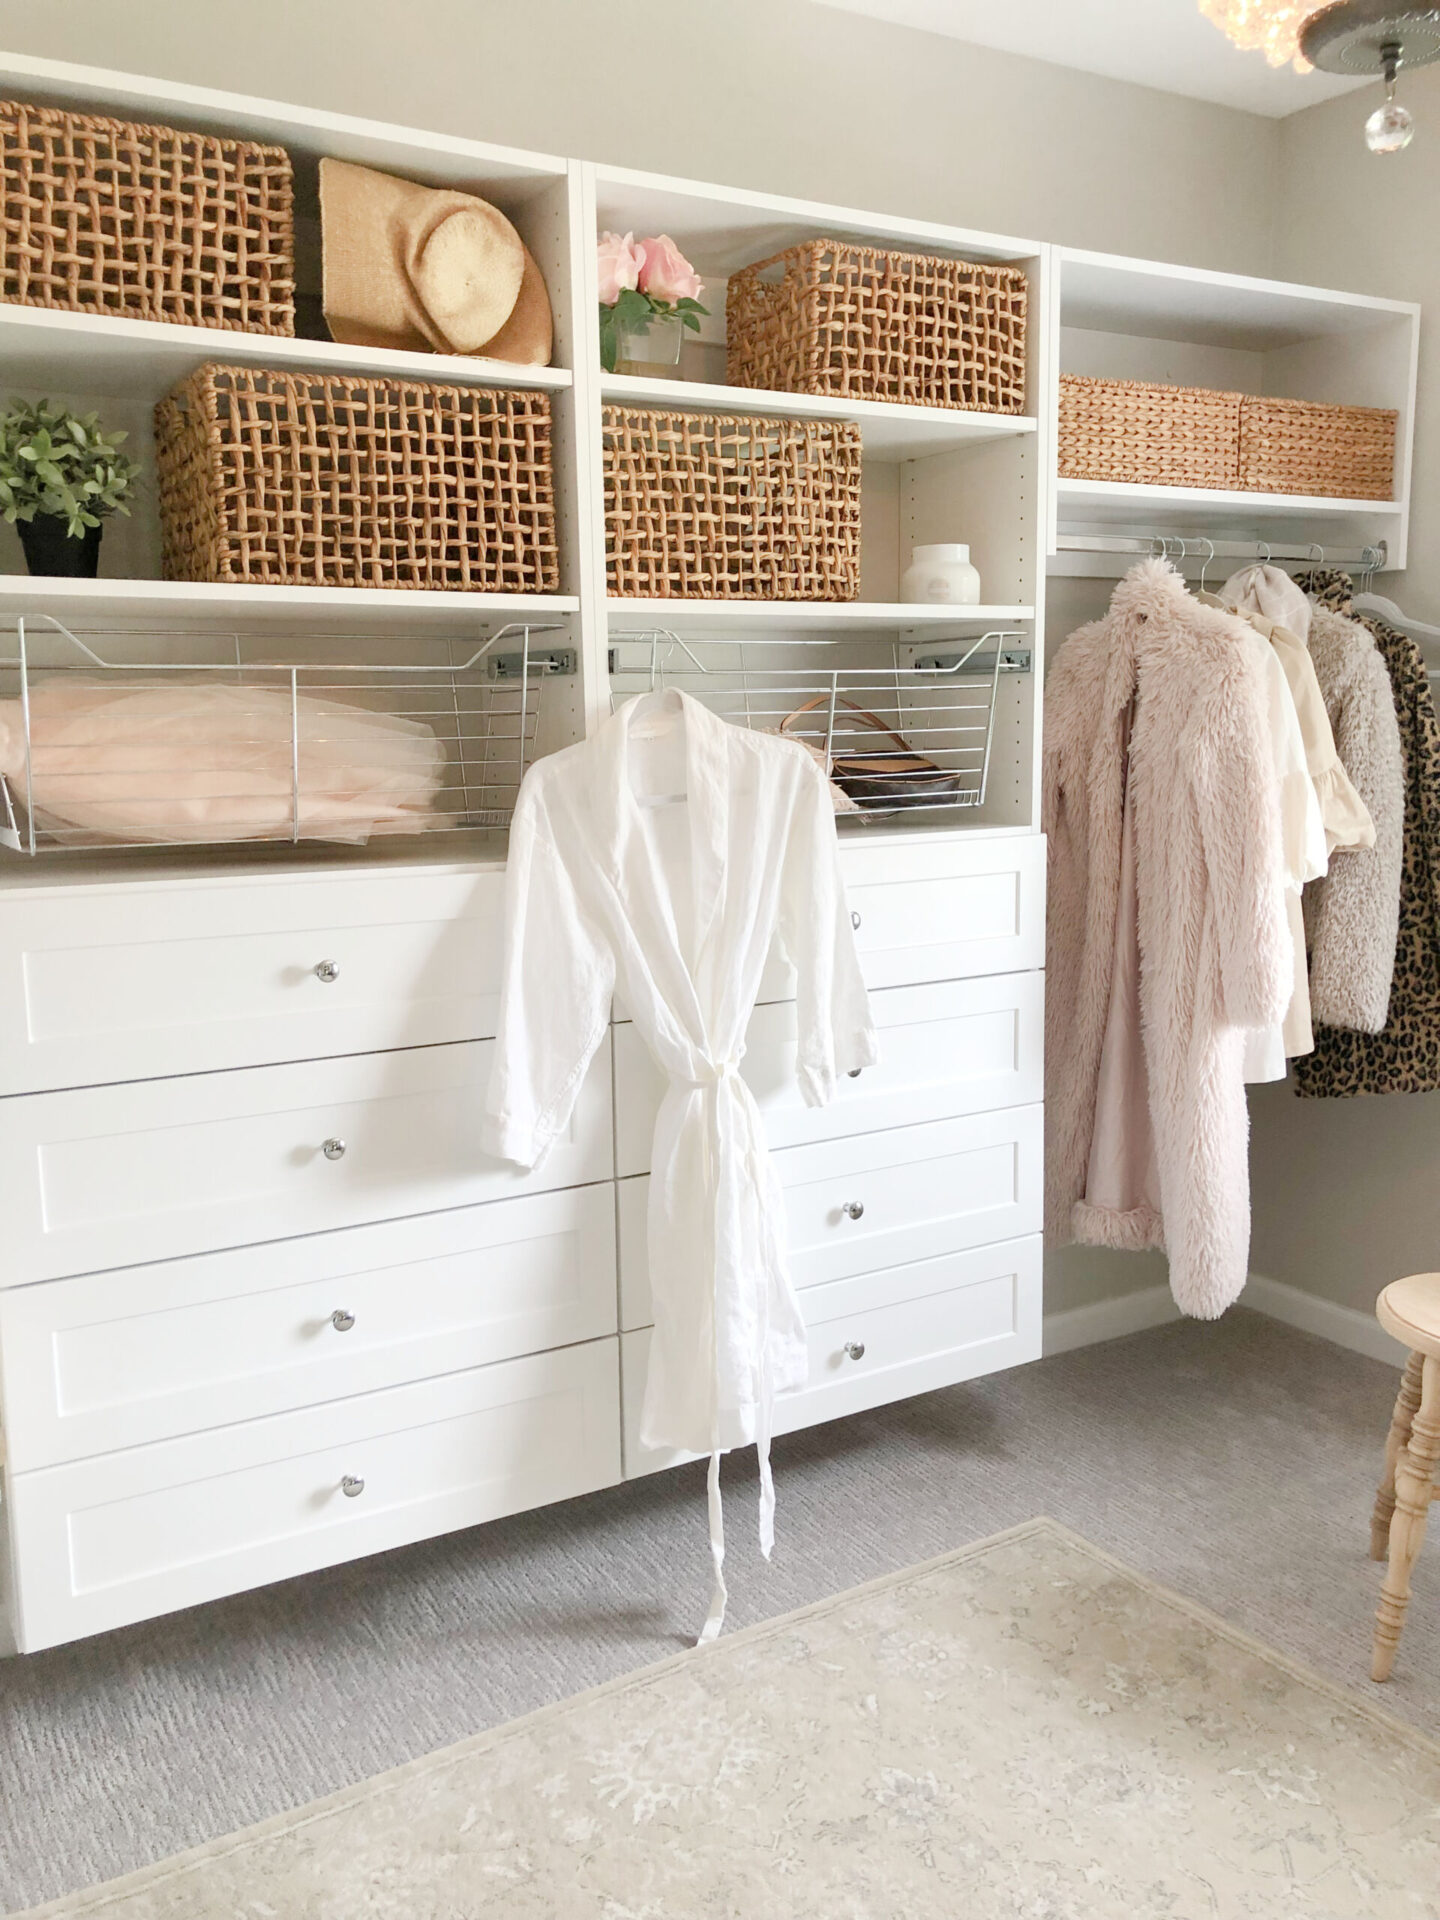 Lots of drawers and pull outs in my new pretty DIY closet - Hello Lovely Studio. #closettowers #customcloset #closetupgrade